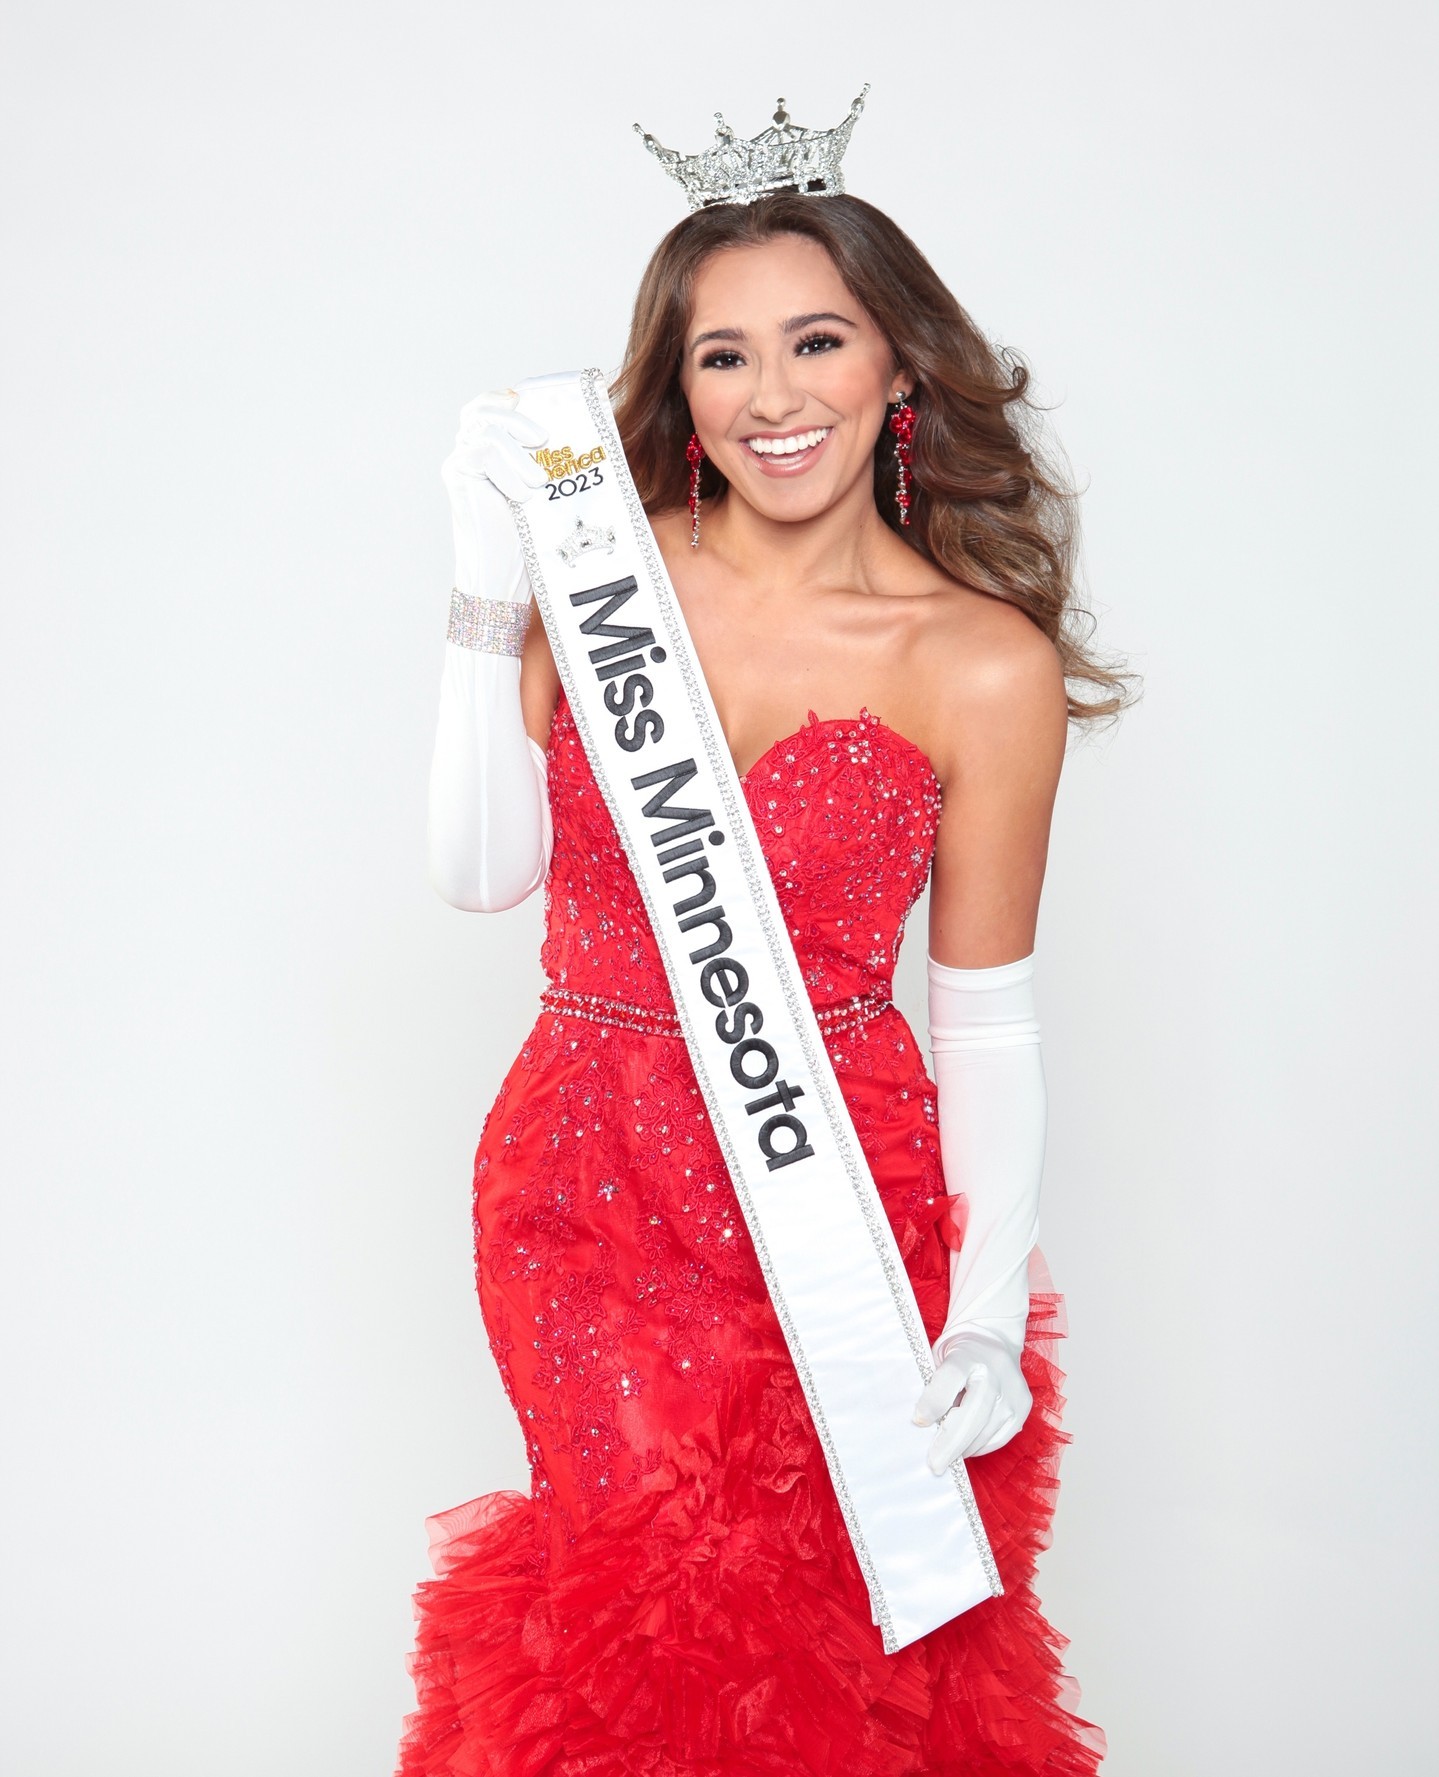 Meet Angelina Amérigo one of the 10 winners from across the state who was chosen for her ongoing dedication to #LovingWhereWeLive. ⁠⁠You might know Angelina Amérigo as Miss Minnesota 2023, but did you know about her One Bottle, One Straw, One Bag at a Time initiative? In 2019, Angelina used the initiative requirement of the Miss America organization to address the ocean plastic crisis. Inspired by her experience competing as a dancer in Florida, where she saw just how much trash was scattered on the beach, Angelina decided to organize a campaign to stop plastic waste, starting right here in Minnesota with local efforts to educate people on the benefits of reducing plastic waste.⁠⁠Since then, Angelina has connected with Minnesotans over social media, inspired people through speaking engagements, and encouraged companies such as Coca-Cola to improve supply chain sustainability. Angelina uses her platform as Miss Minnesota to have extended conversations and focus on community connections. This allows her to go beyond numbers and statistics and make a change that’s desperately needed to address the ocean plastic problem. As a marketing student at the University of Minnesota Moorhead, she hopes to learn even more about how to take her care for place to the next level. To get involved, connect with Angelina @missamericamn she loves to hear from people and help them connect with her work!⁠ — from Instagram